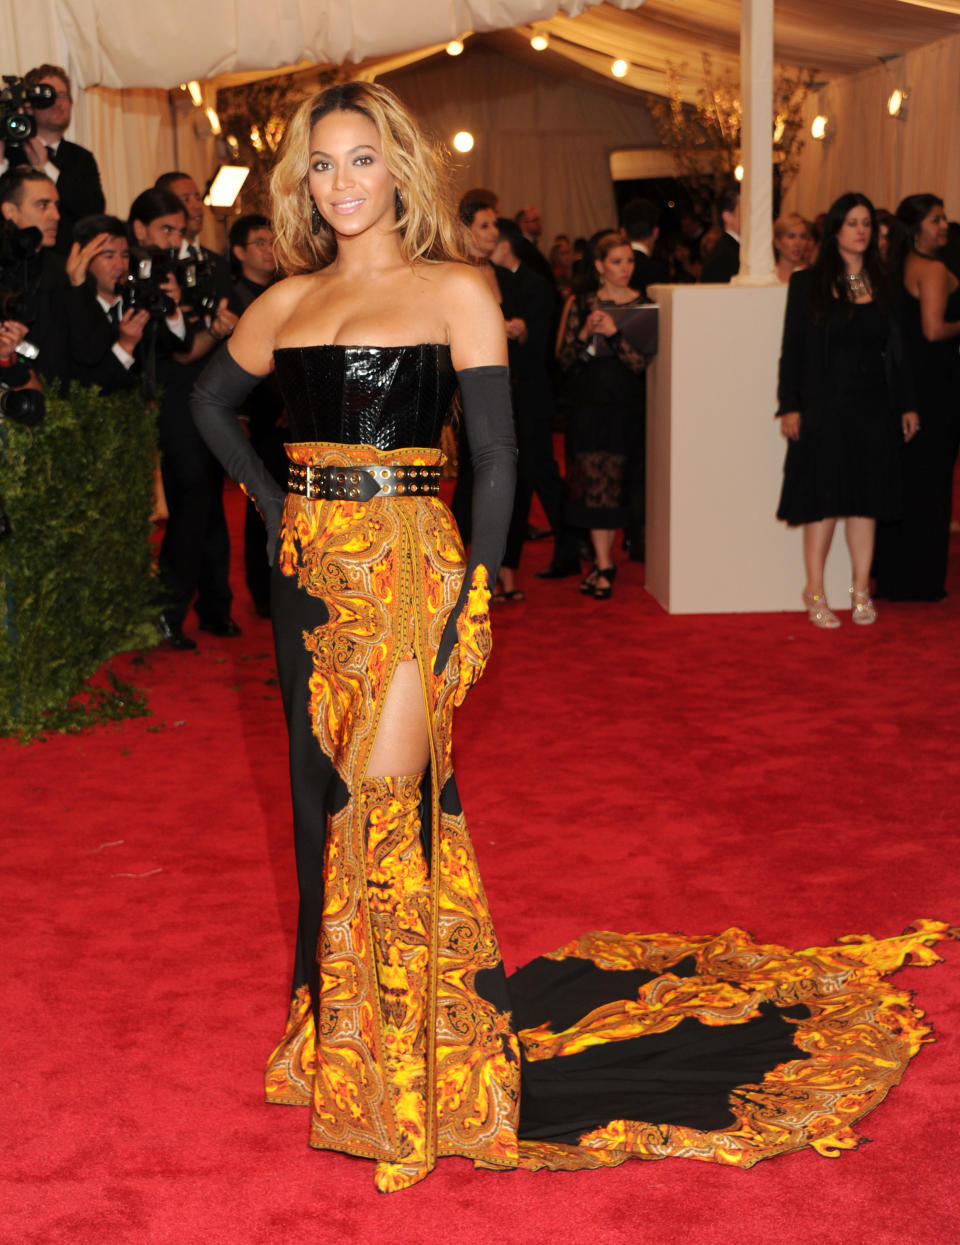 Beyonce Knowles attends The Metropolitan Museum of Art's Costume Institute benefit celebrating "PUNK: Chaos to Couture" on Monday, May 6, 2013, in New York. (Photo by Evan Agostini/Invision/AP)